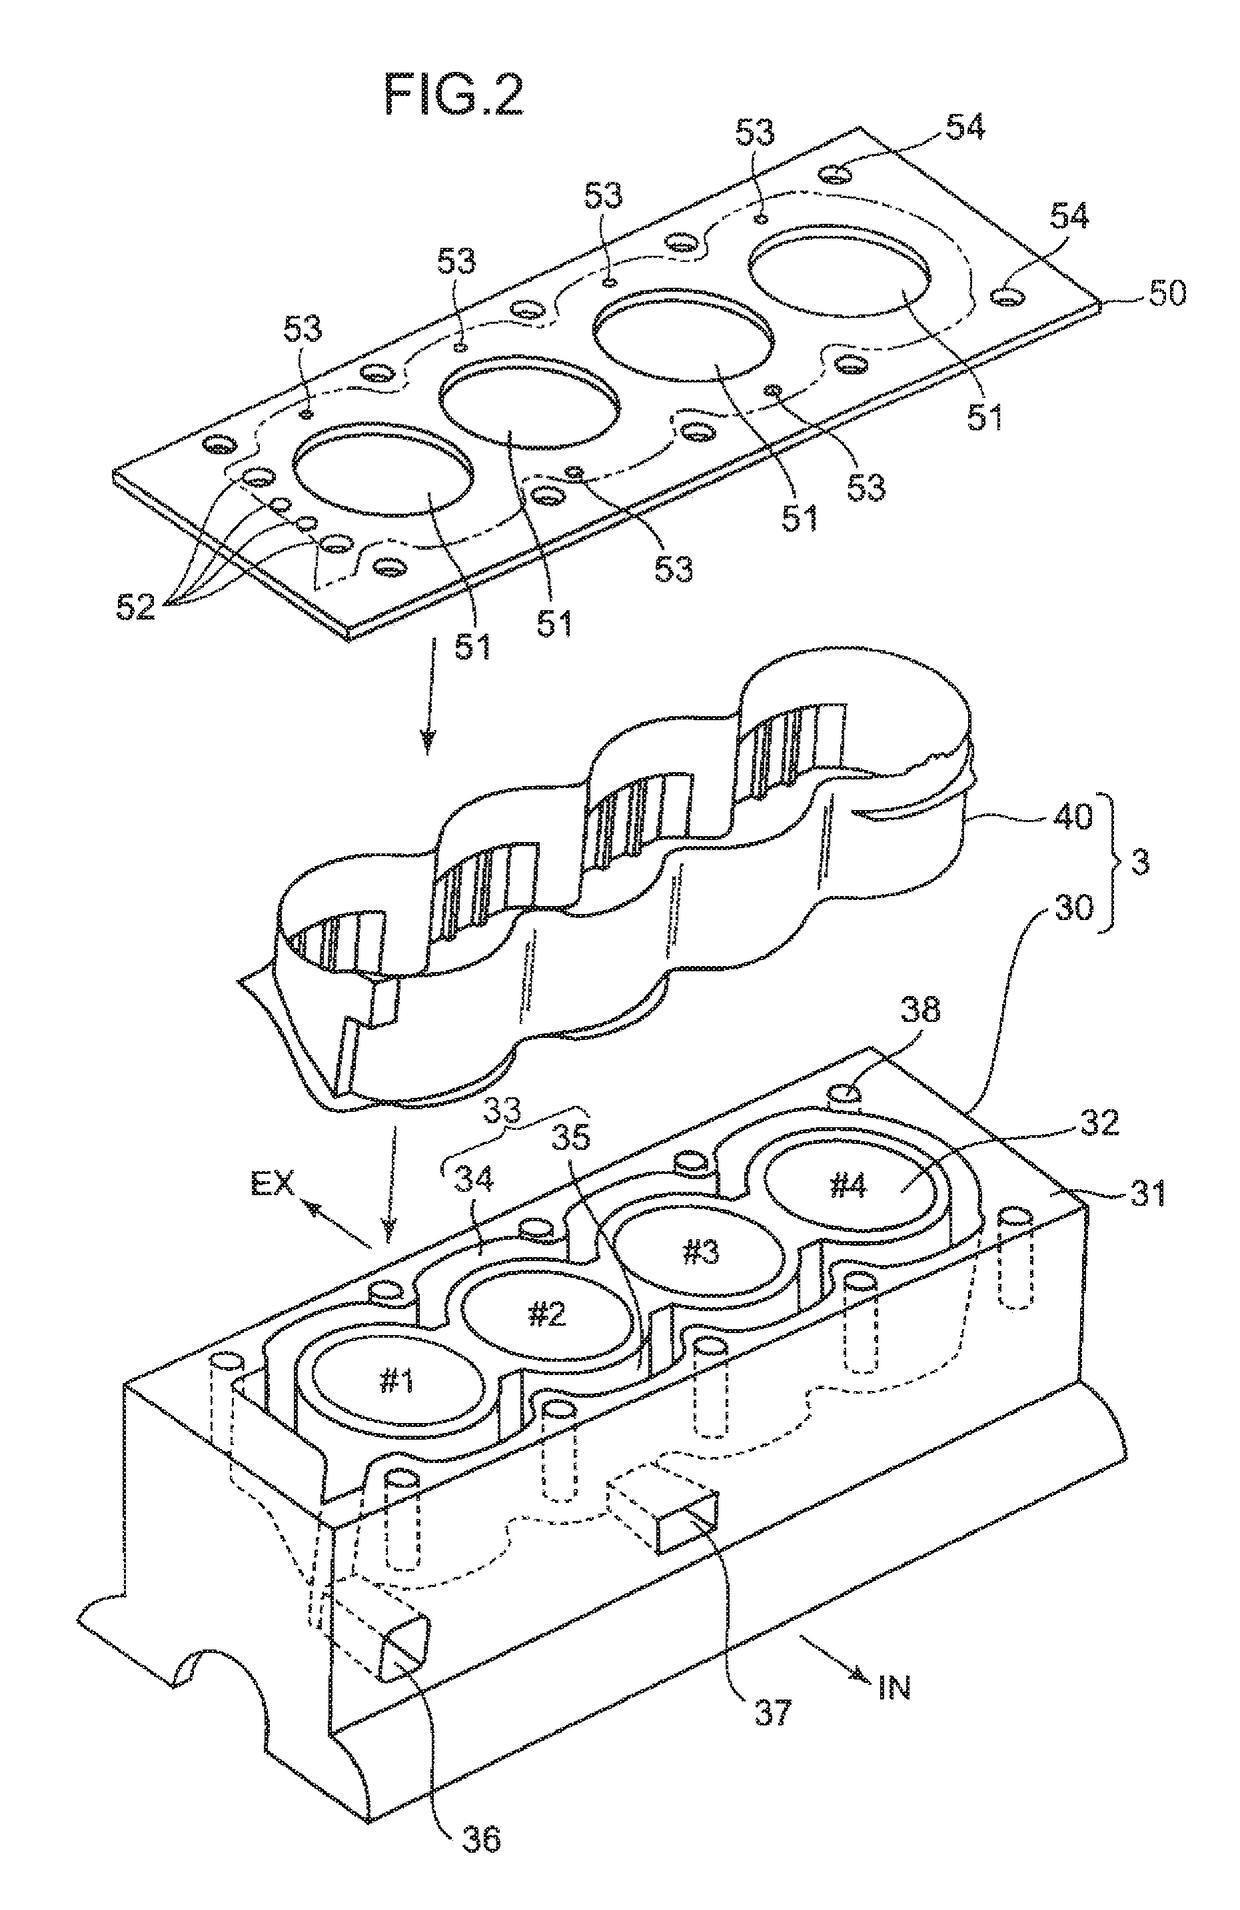 Cooling device for multi-cylinder engine